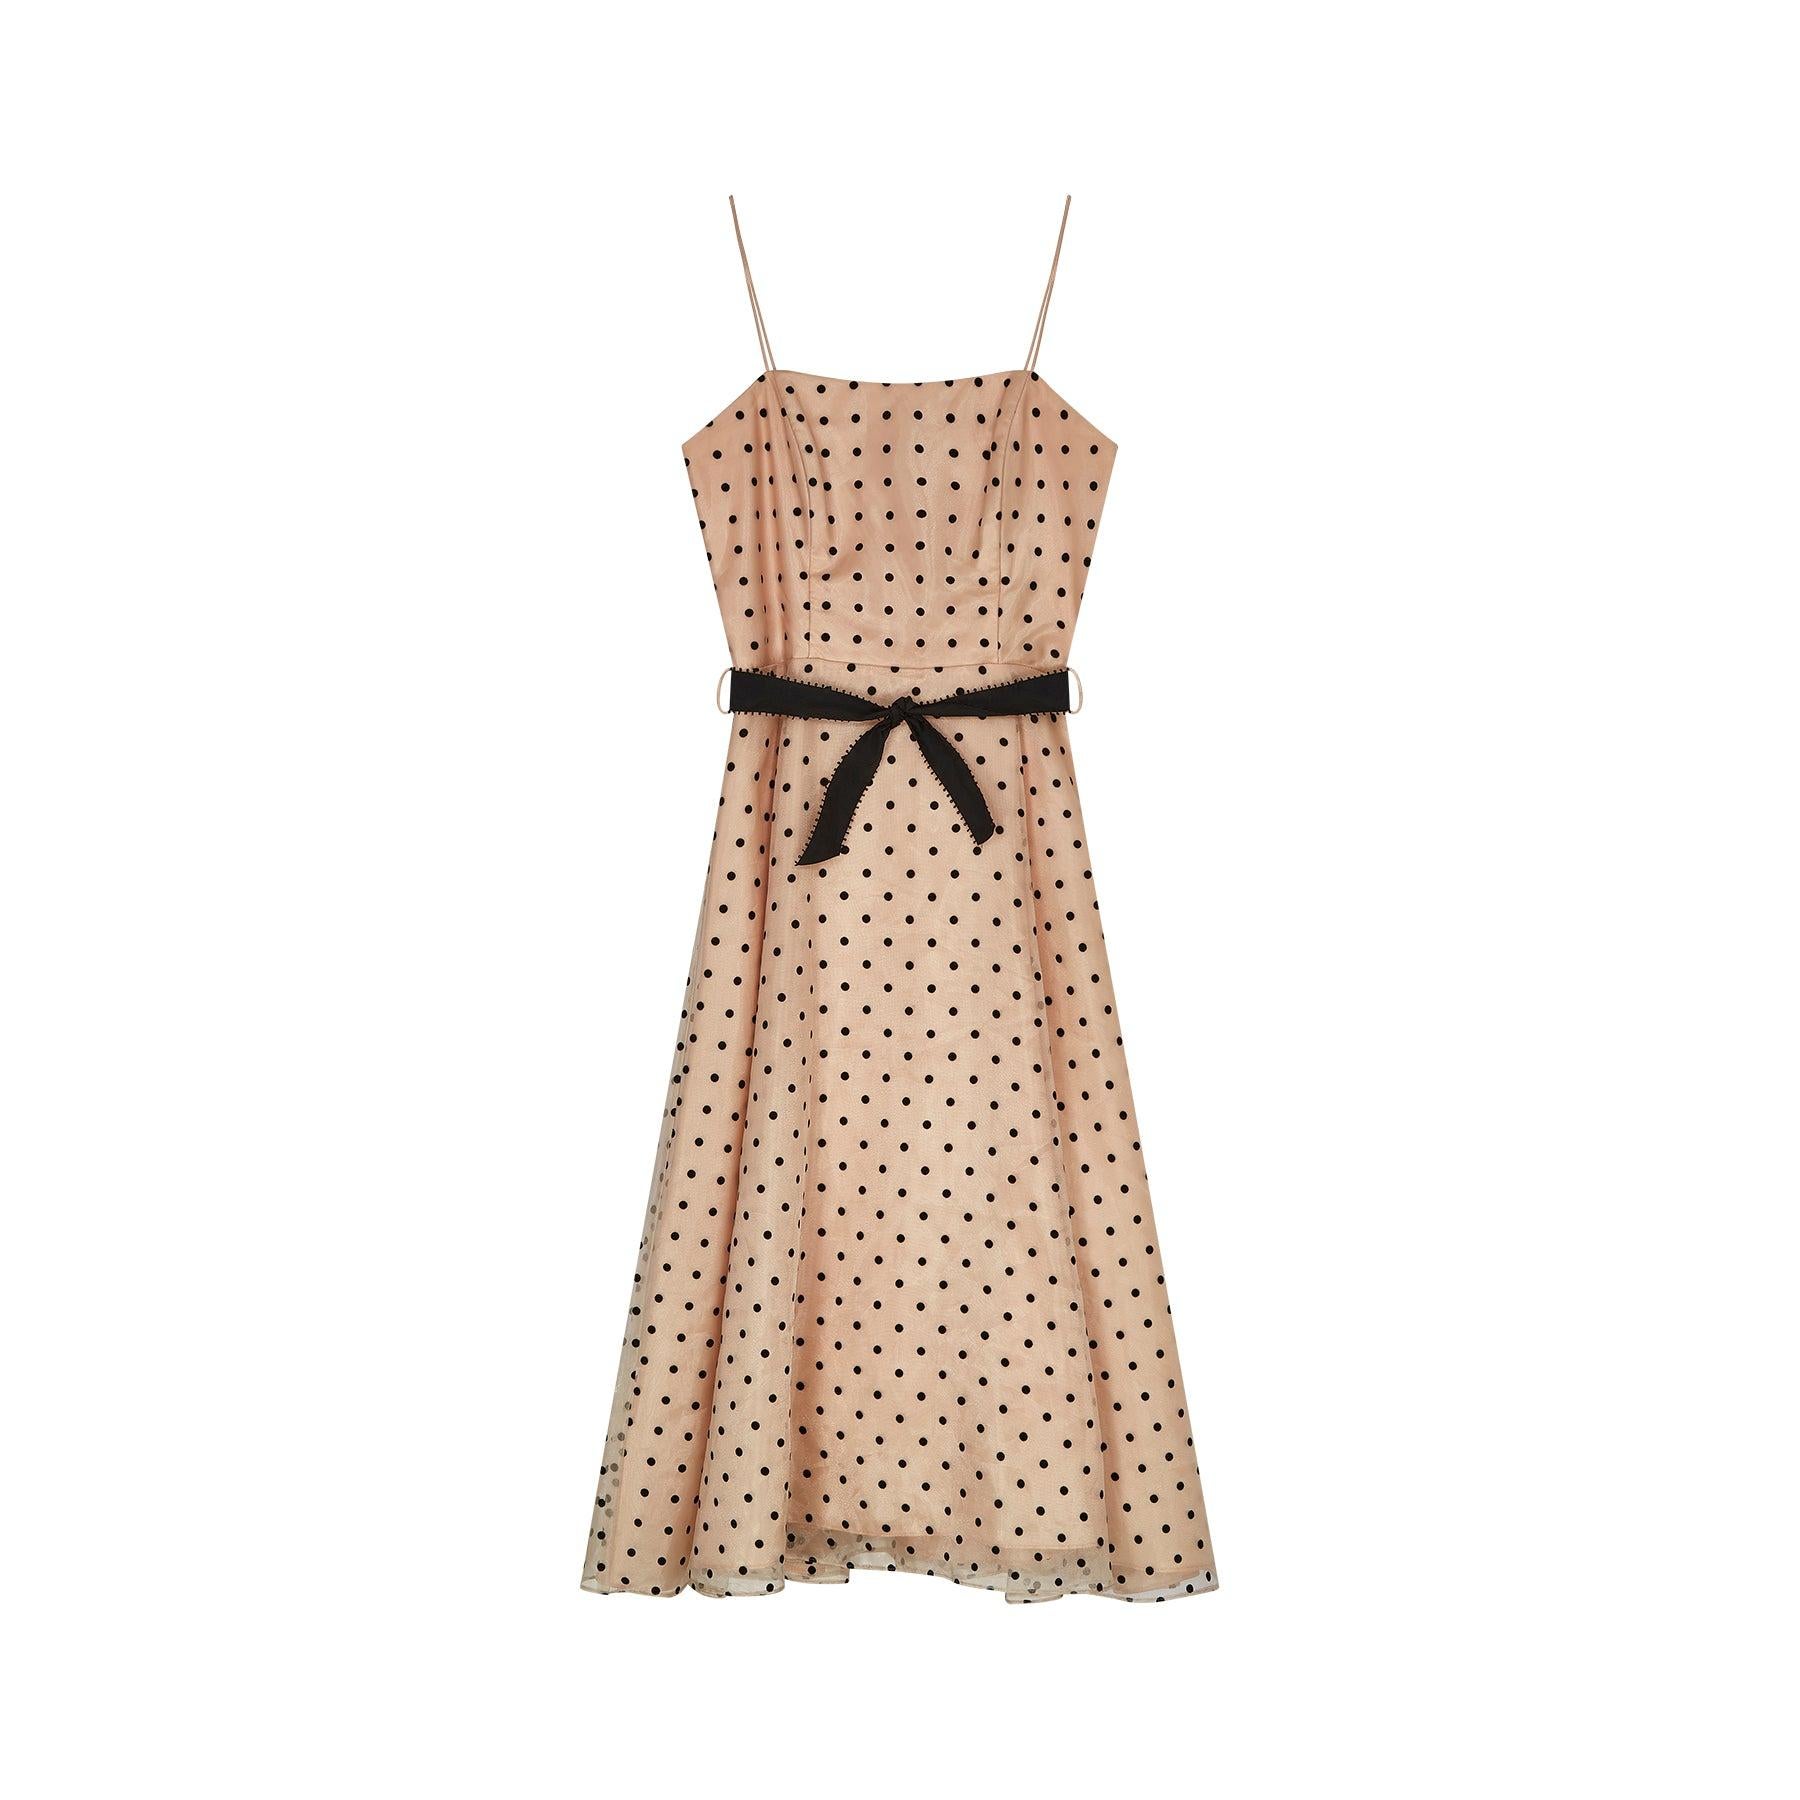 This dress really looks like something out of the 1950s but was almost certainly manufactured in the 1970s. I really love the medium weight voile-like fabric that is overlaid with black, flocked velvet, polka dots. The dress is Princess seamed and